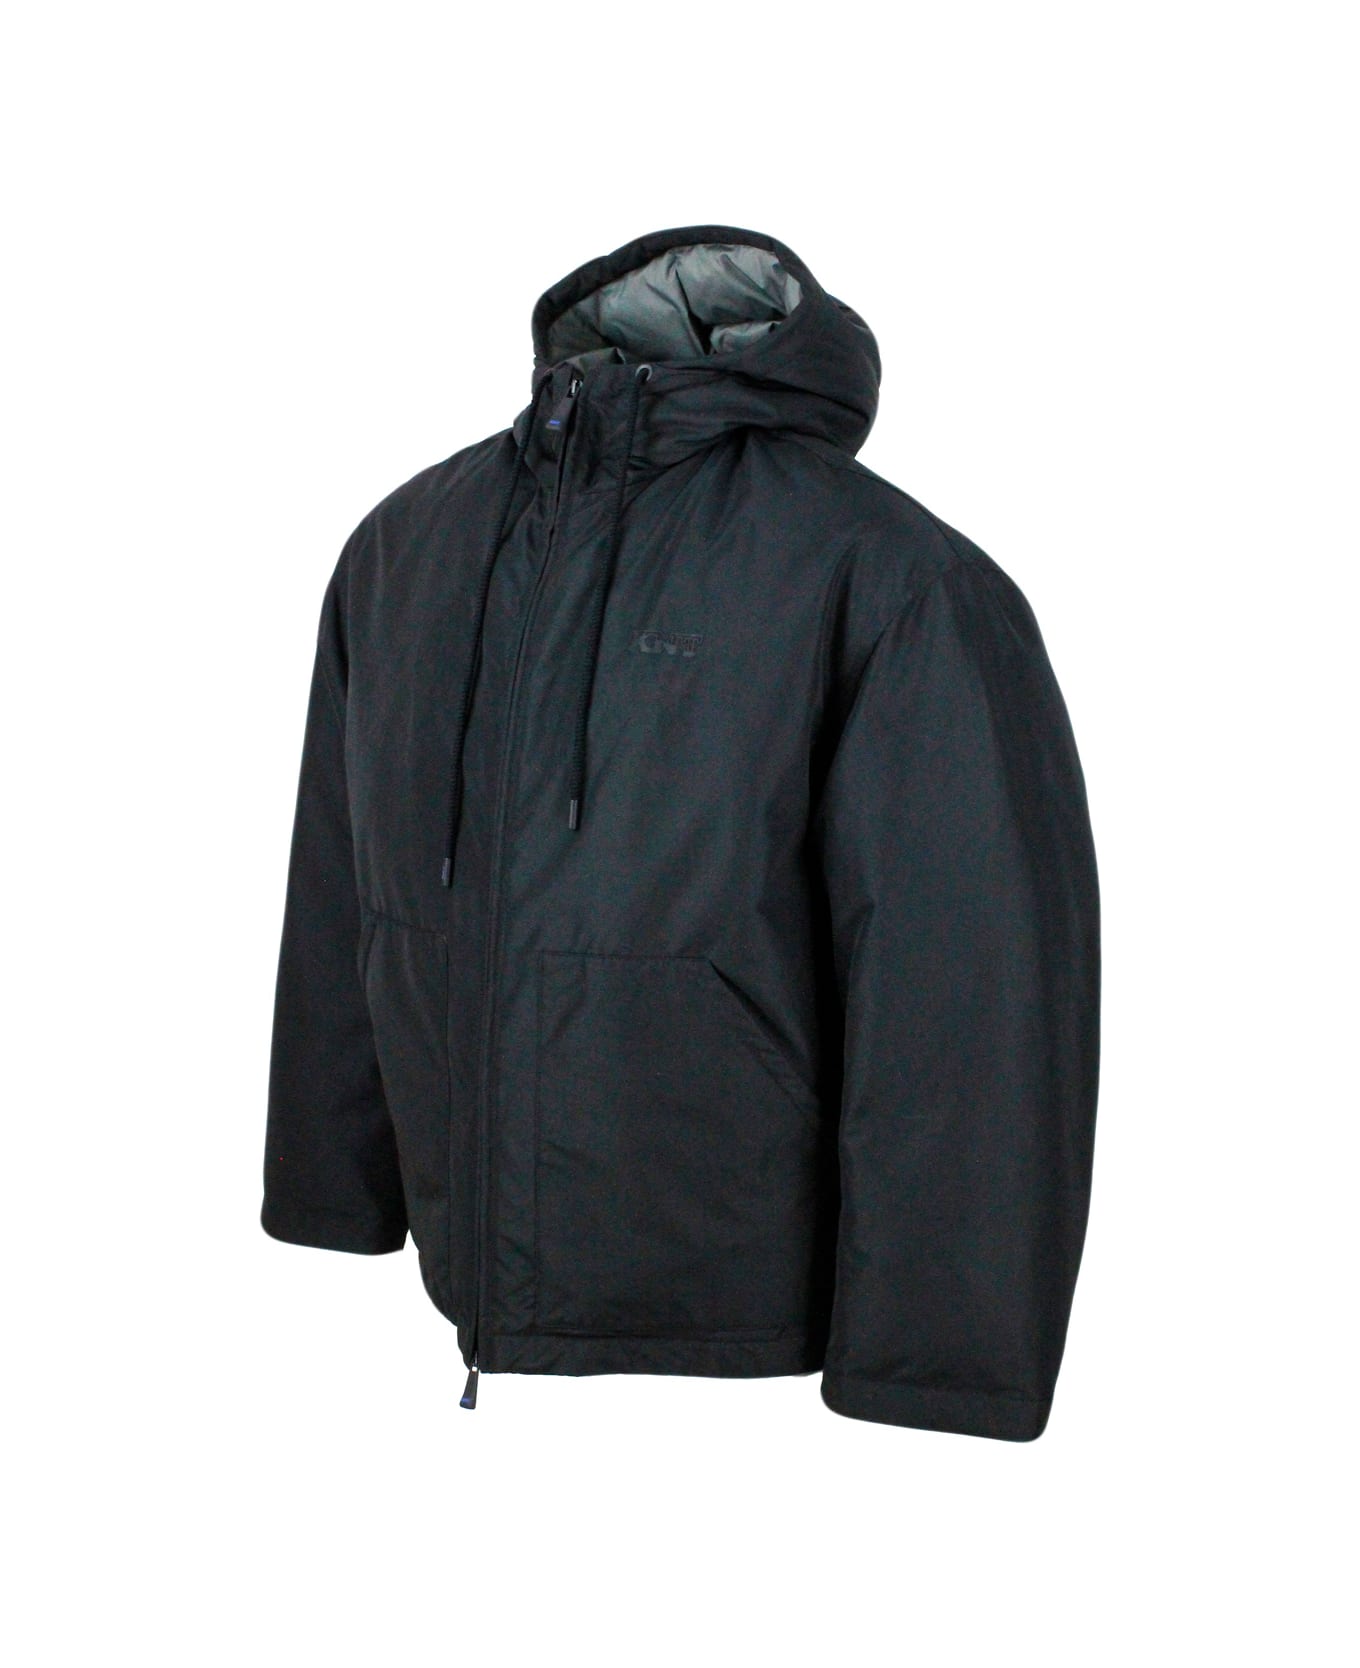 Kiton Knt Down Jacket In Technical Fabric With Hood With Drawstring With Smooth Exterior And Boudin Quilted Interior In Contrasting Color. Small Matching Lo - Black